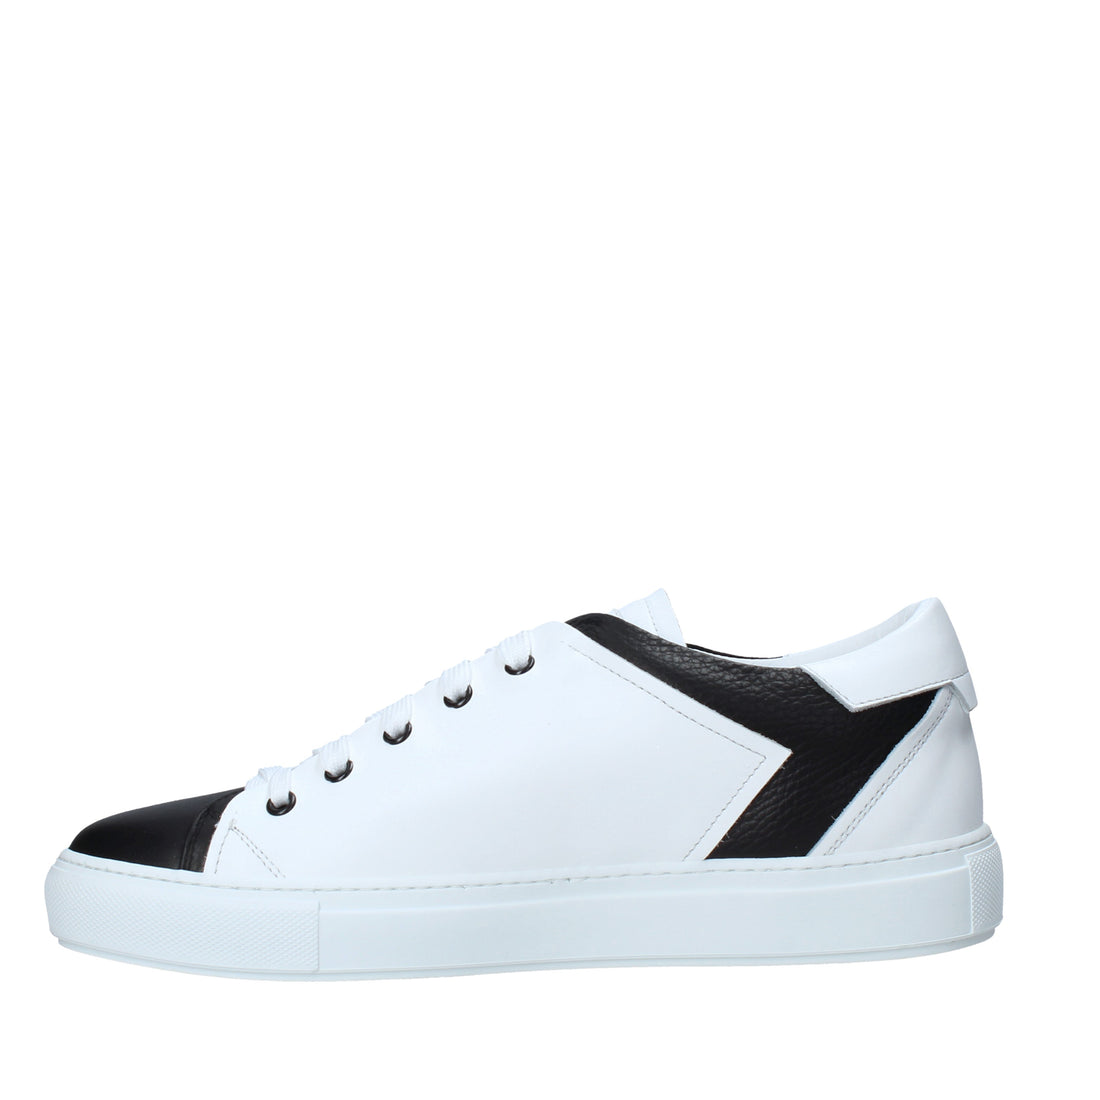 Sneakers Bianco Costume National